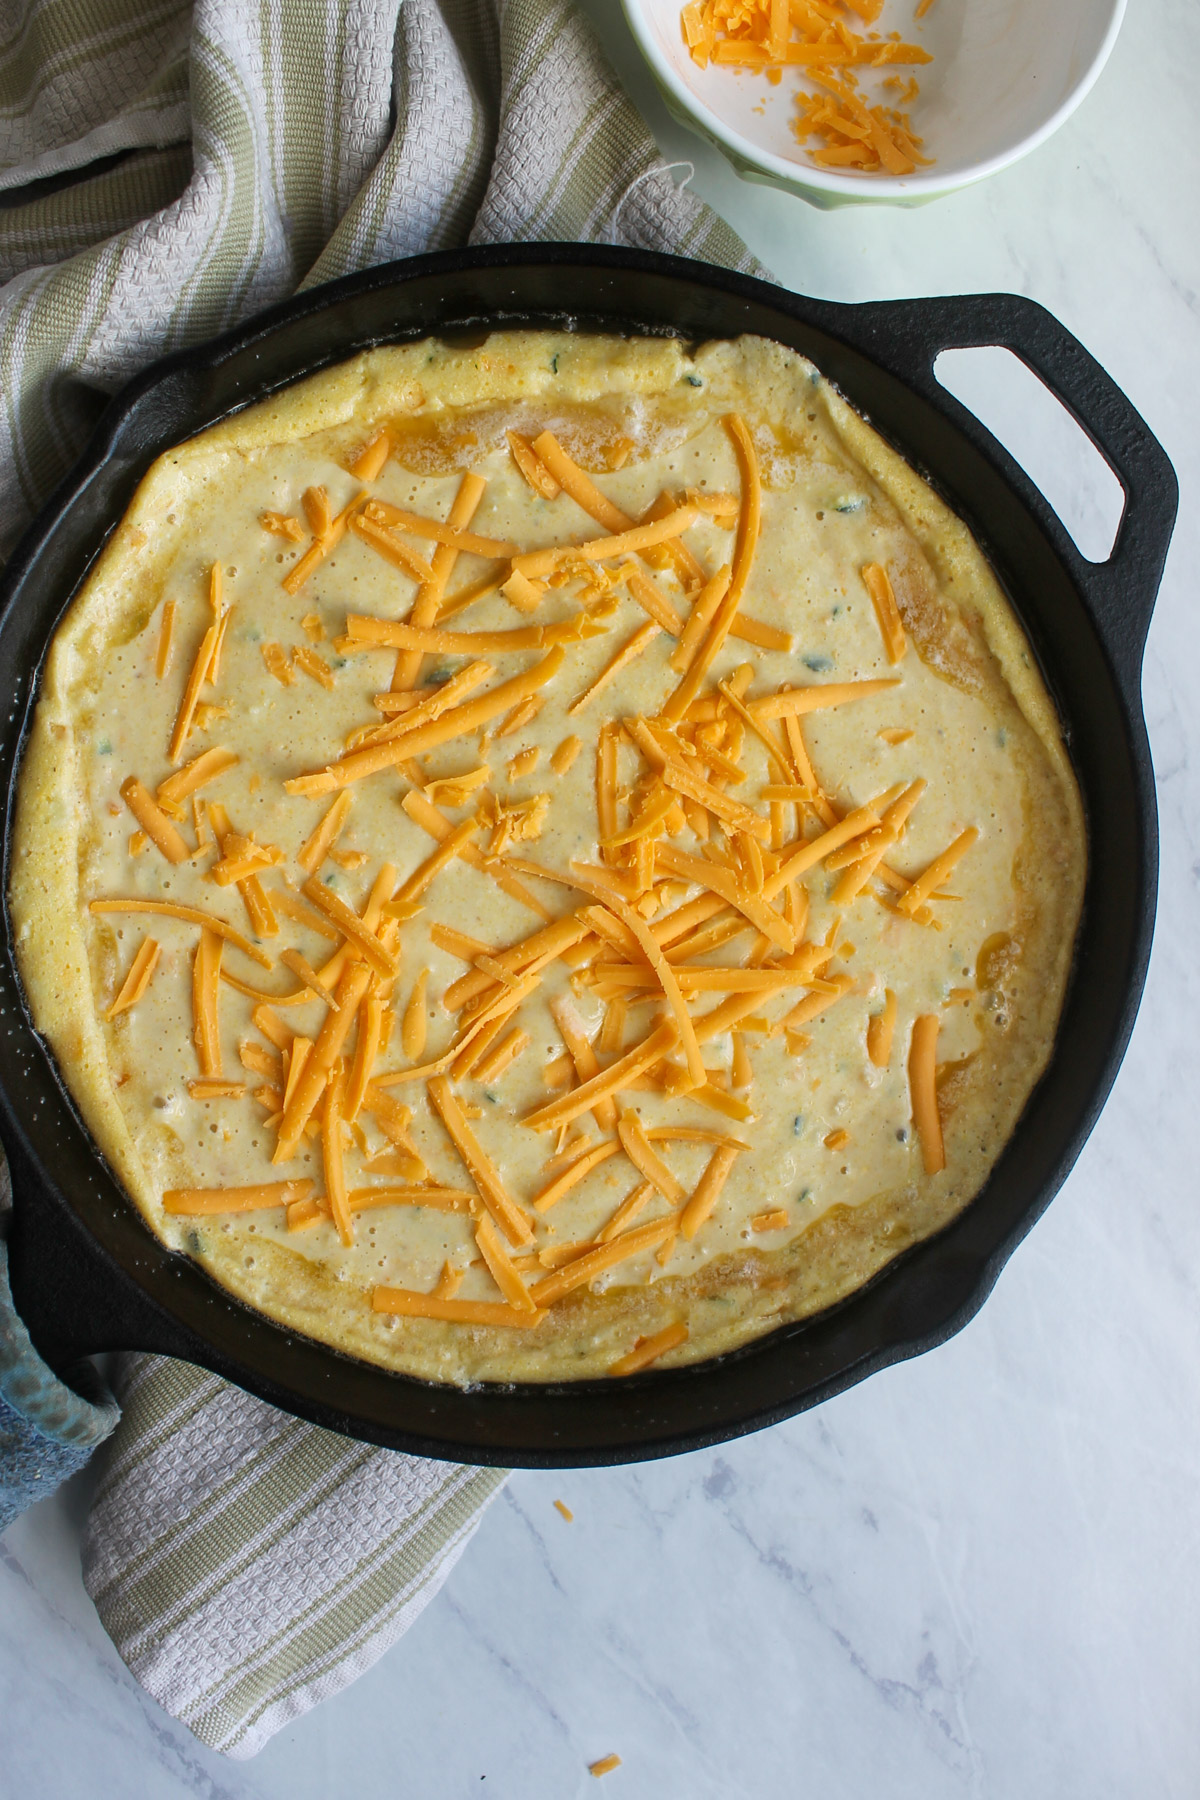 Adding the cornbread batter to the hot skillet and topping with shredded cheese.